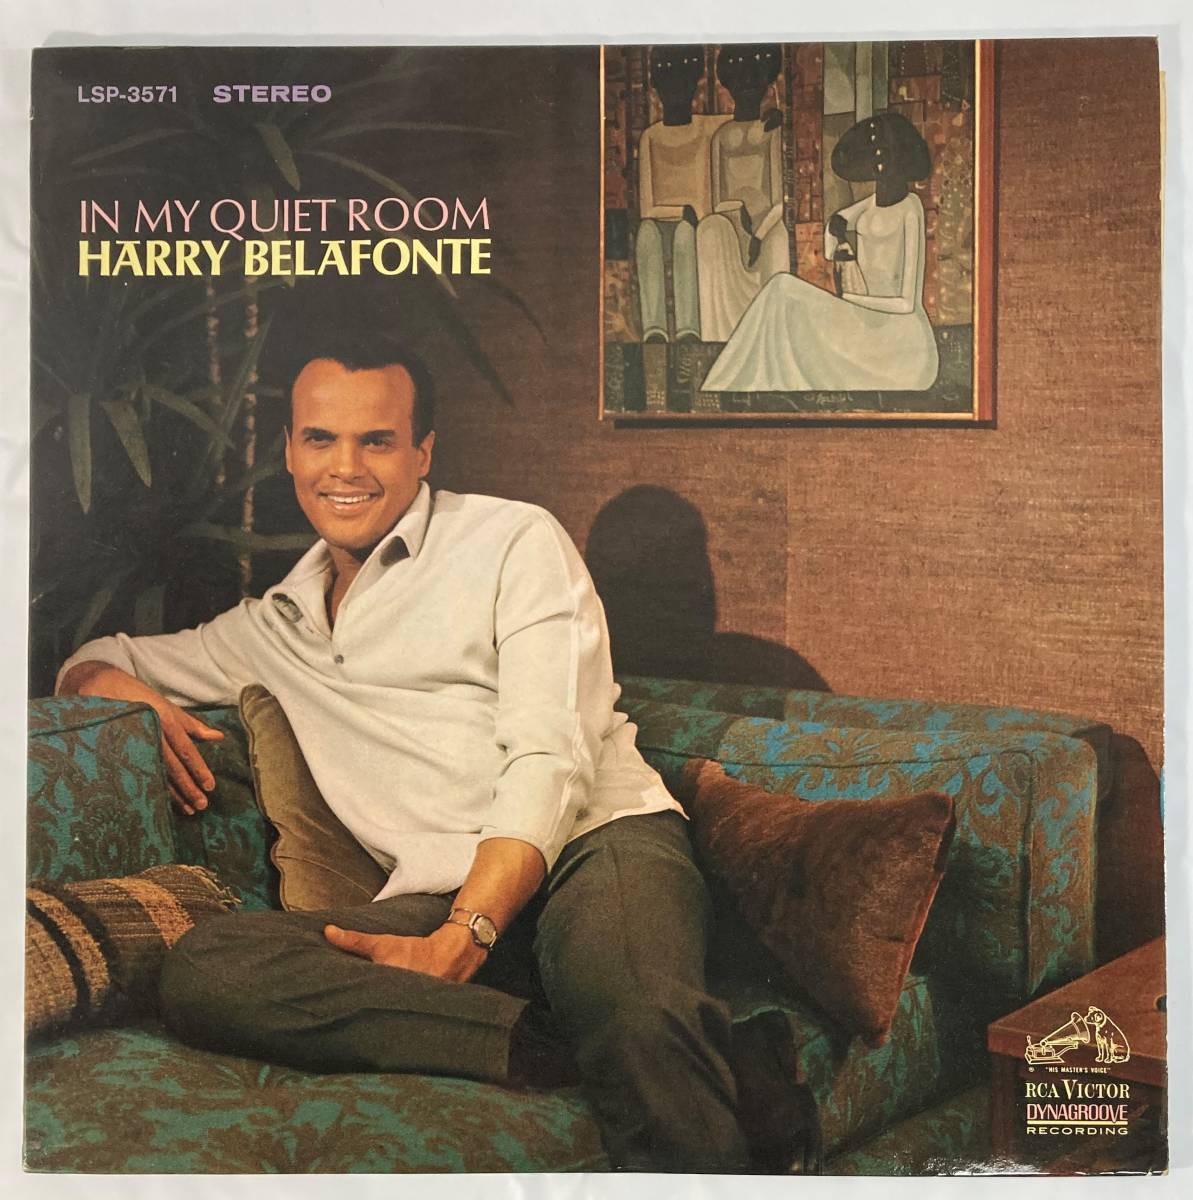  Harry *bela phone te(Harry Belafonte) / My In My Quiet Room rice record LP RCA VICTOR LSP-3571 STEREO